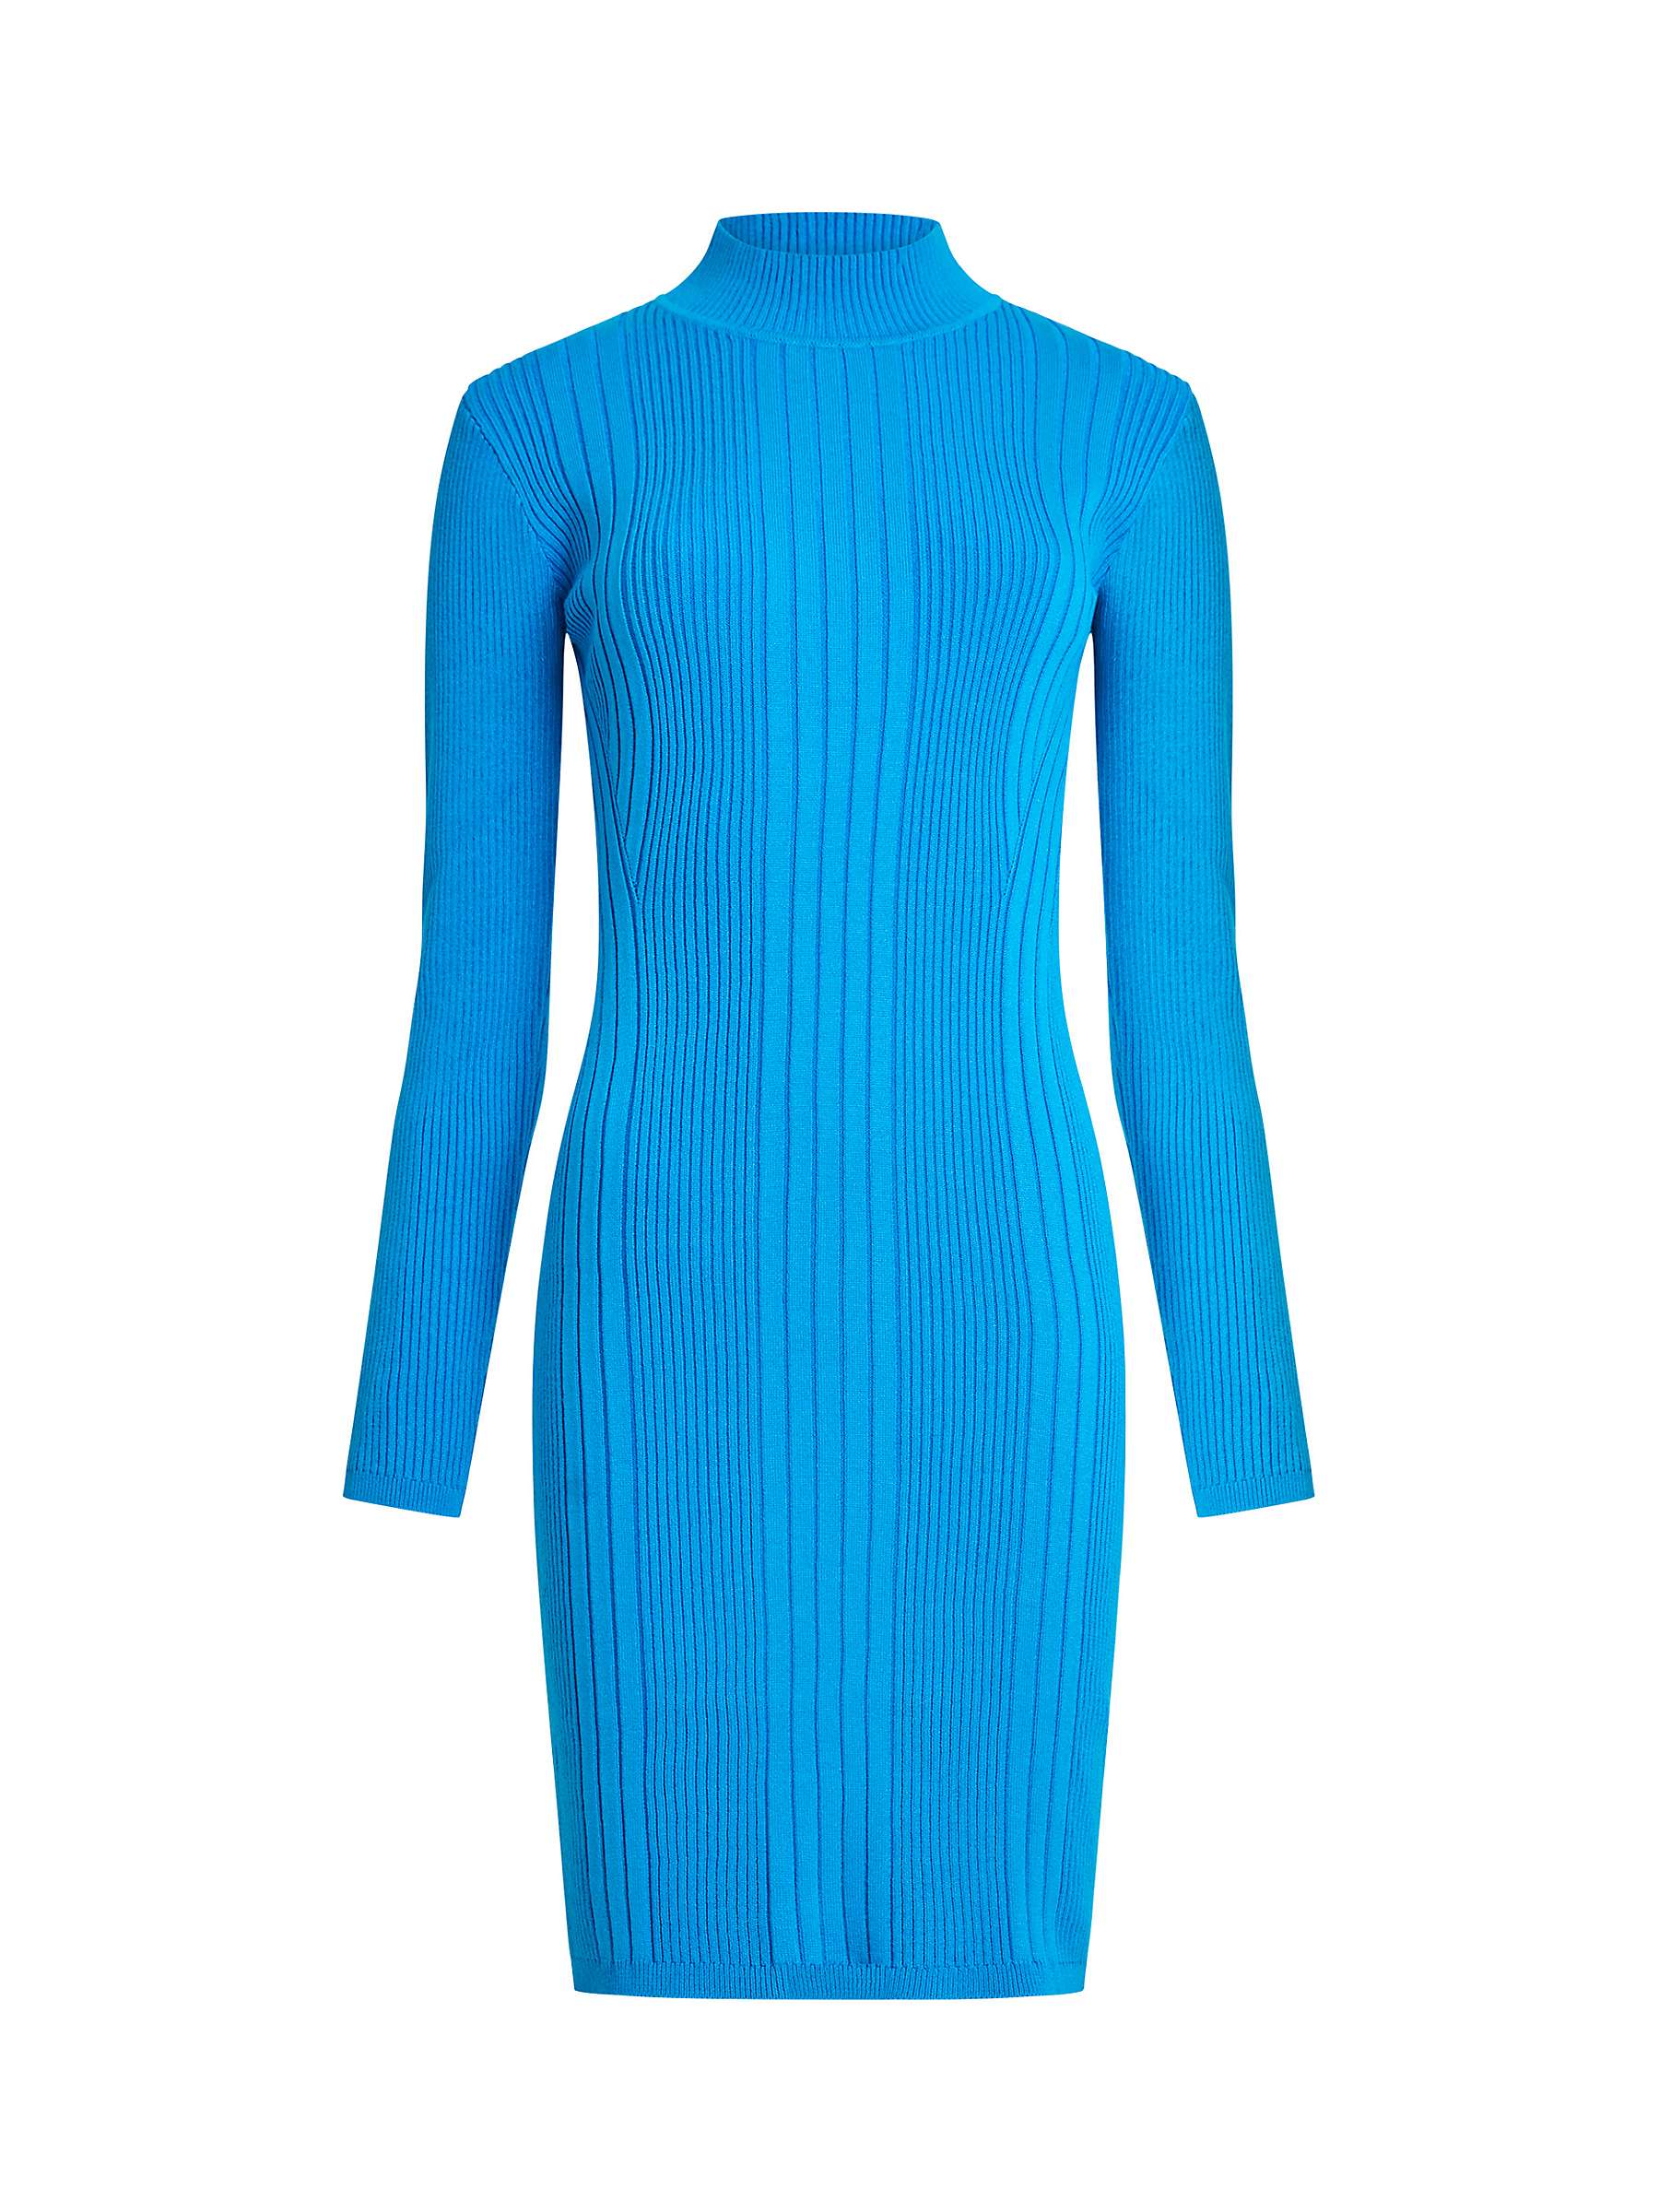 Buy French Connection Mari Knit Dress Online at johnlewis.com